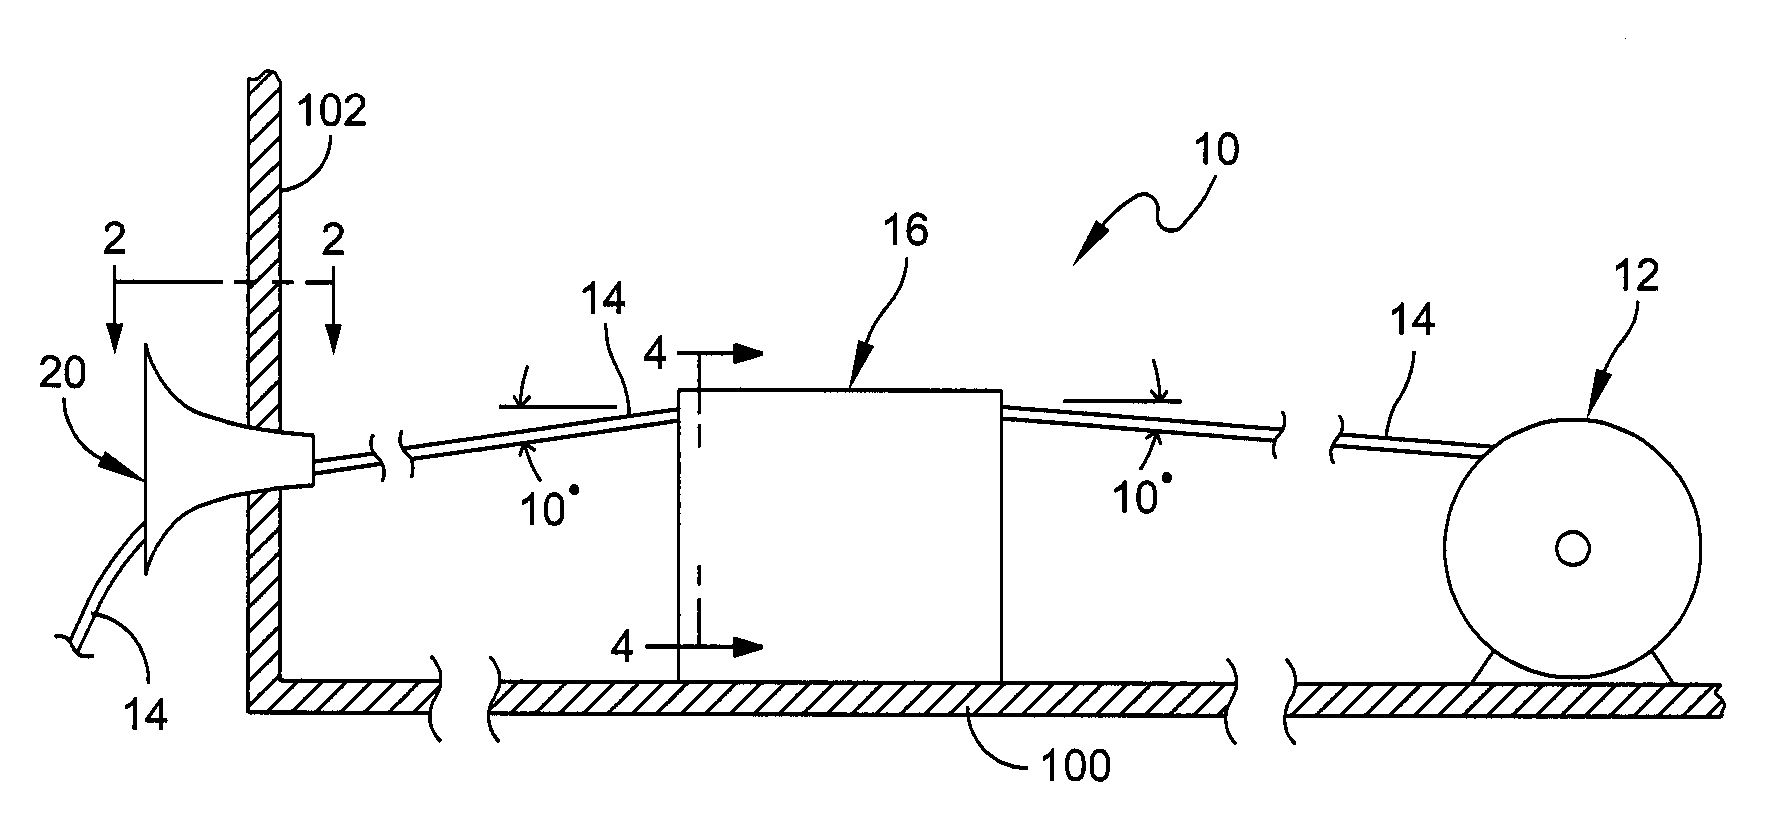 Fairlead for a tow cable handling system